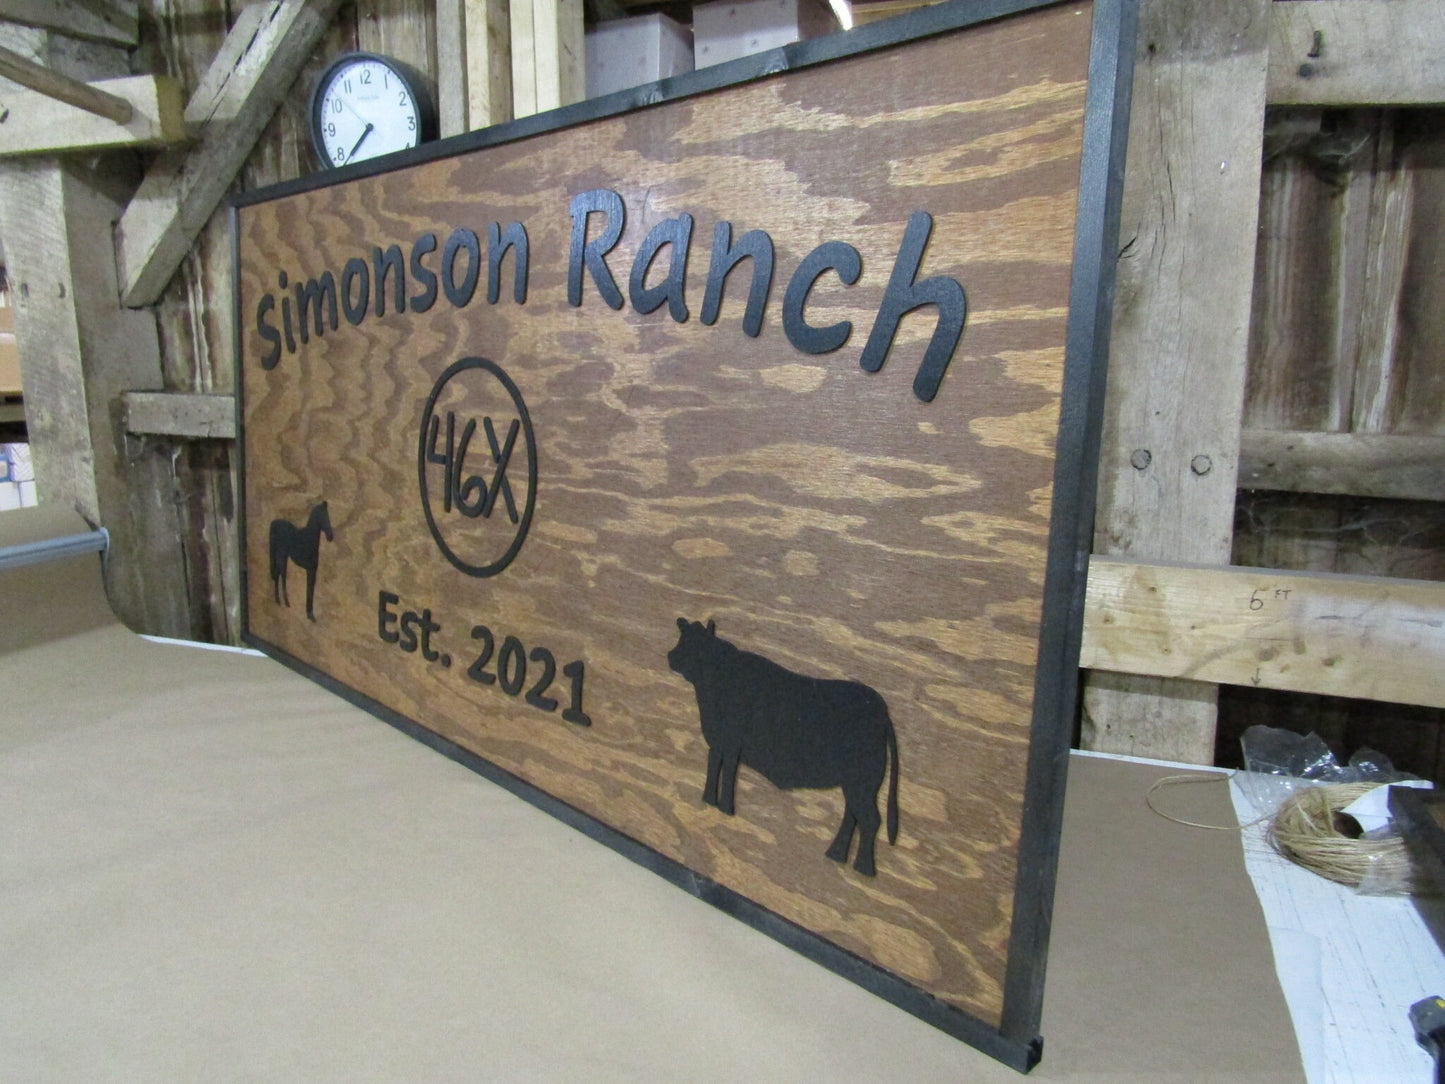 Large Custom Ranch Sign Cow Cattle Horse Established Sign Entrance Drive Way Signage Commercial Indoor Outdoor Oversized Handmade Sign